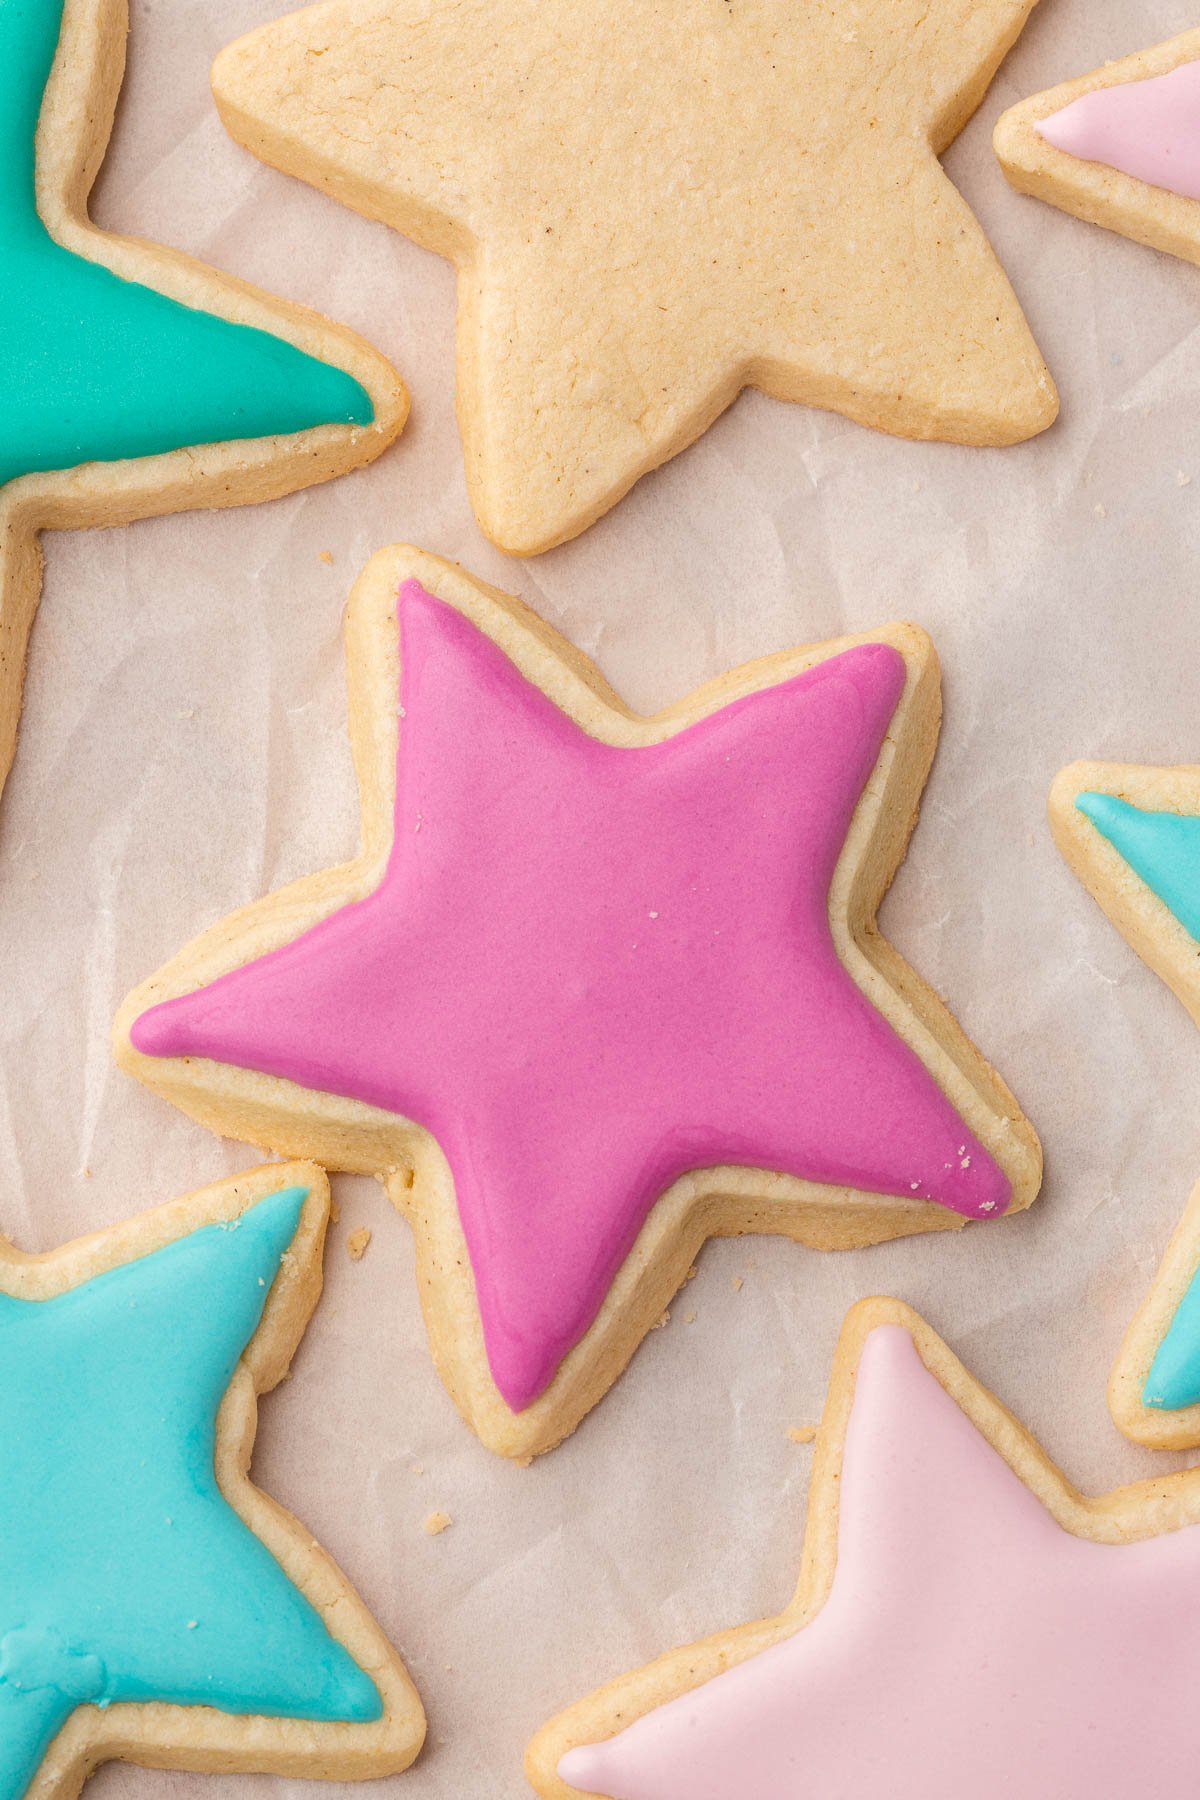 An overhead view of several gluten free sugar cookies ahped like stars and decorated with pink, blue, and green royal icing on a piece of crumpled parchment paper.